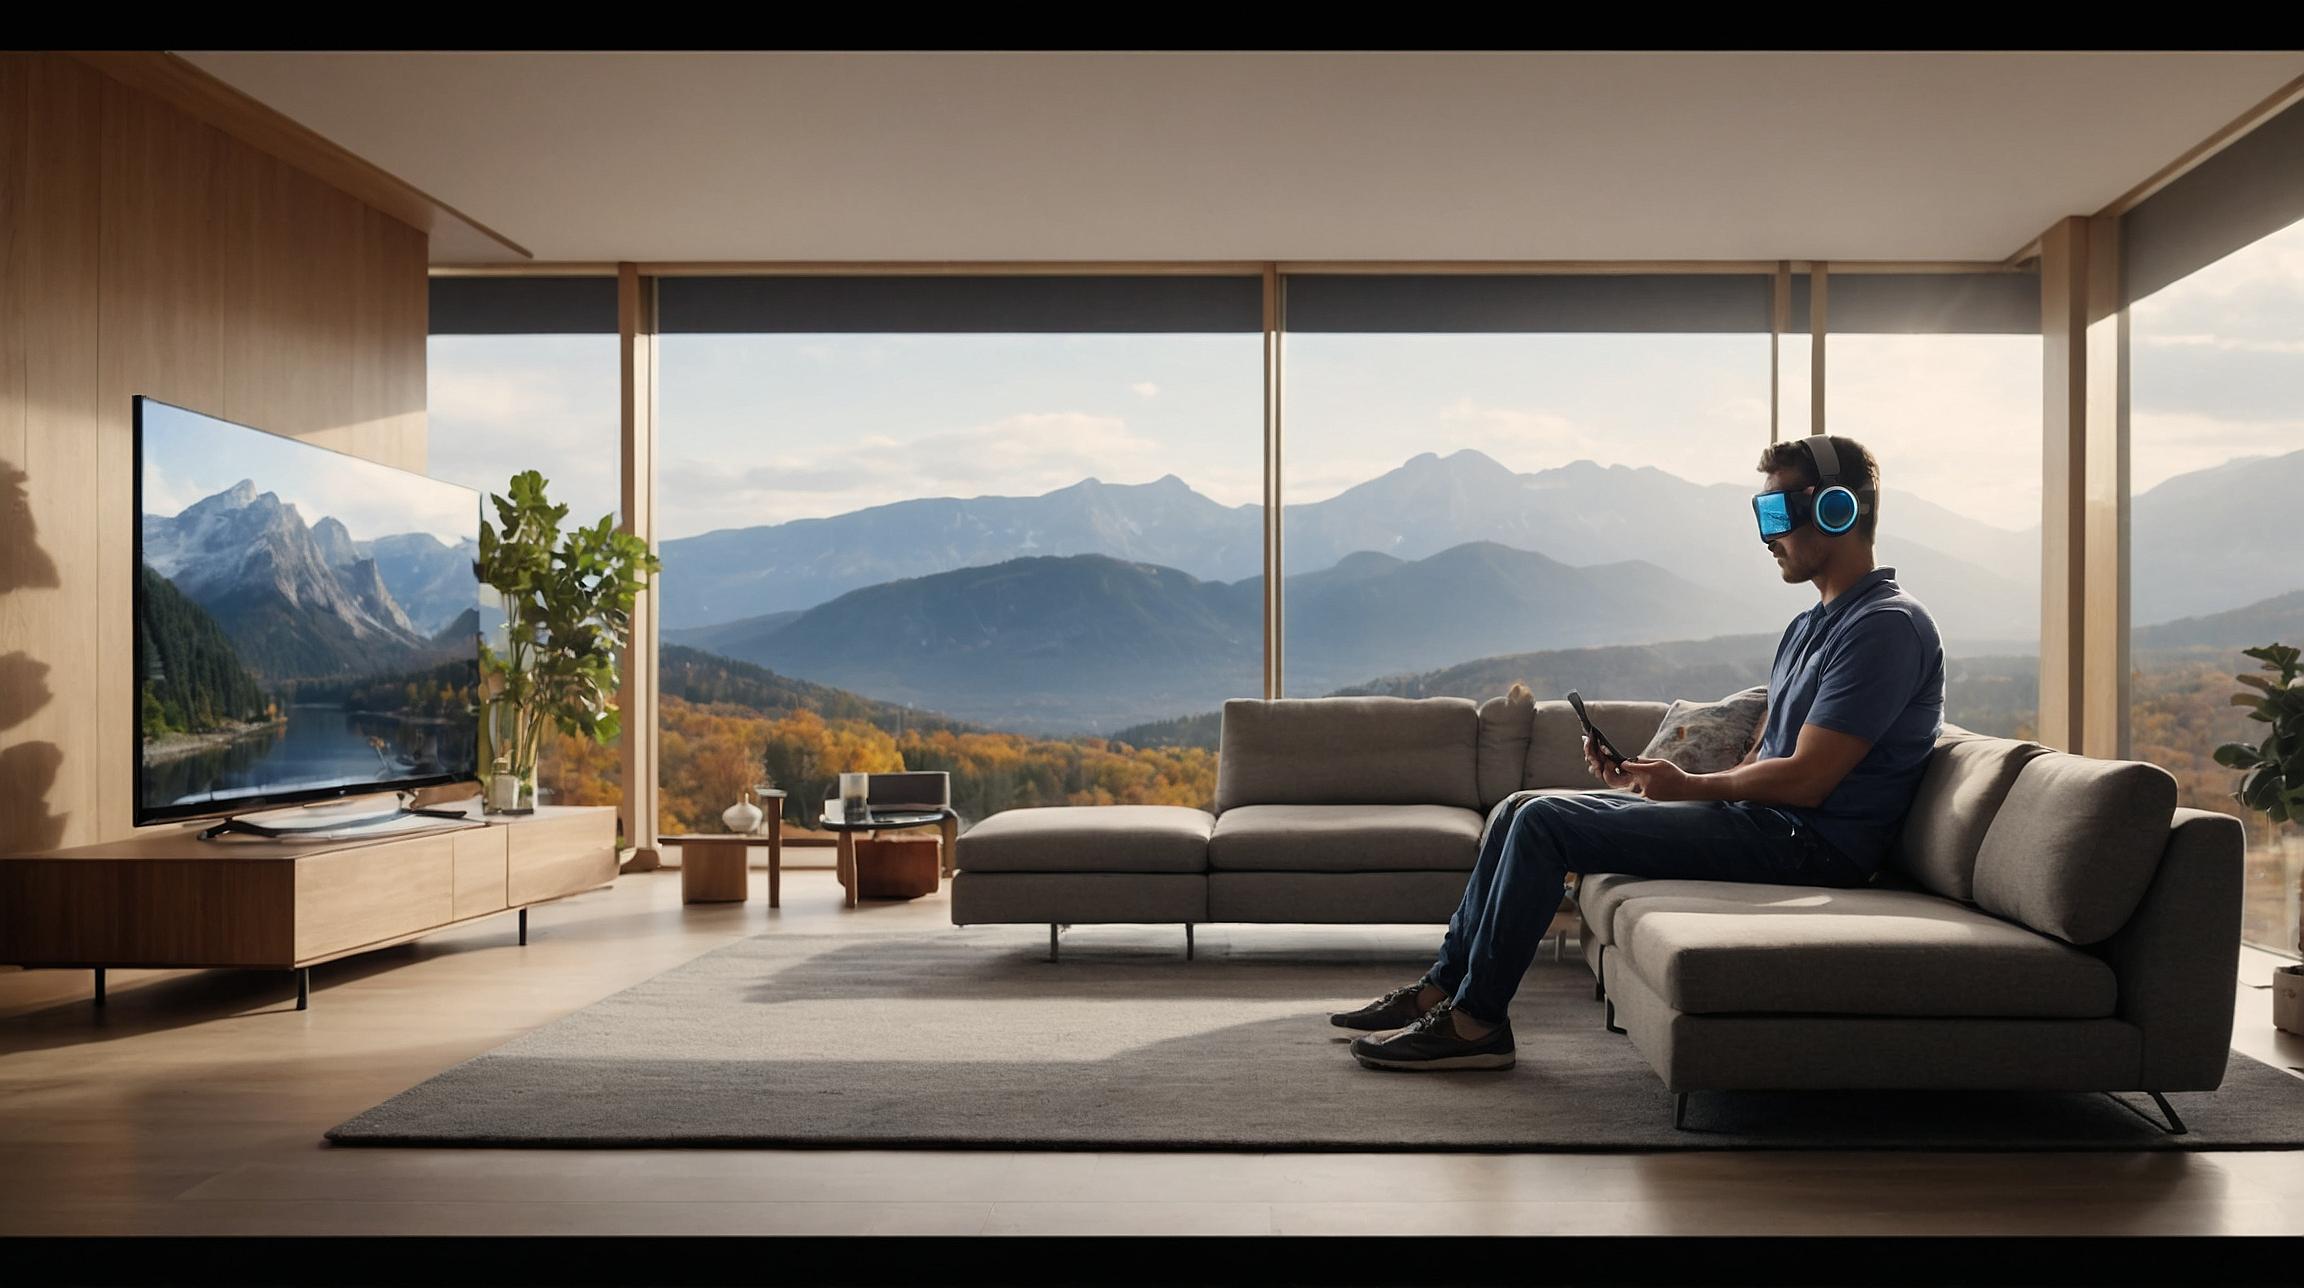 Meta Tests Freeform Window Placement for Quest Headsets | FinOracle